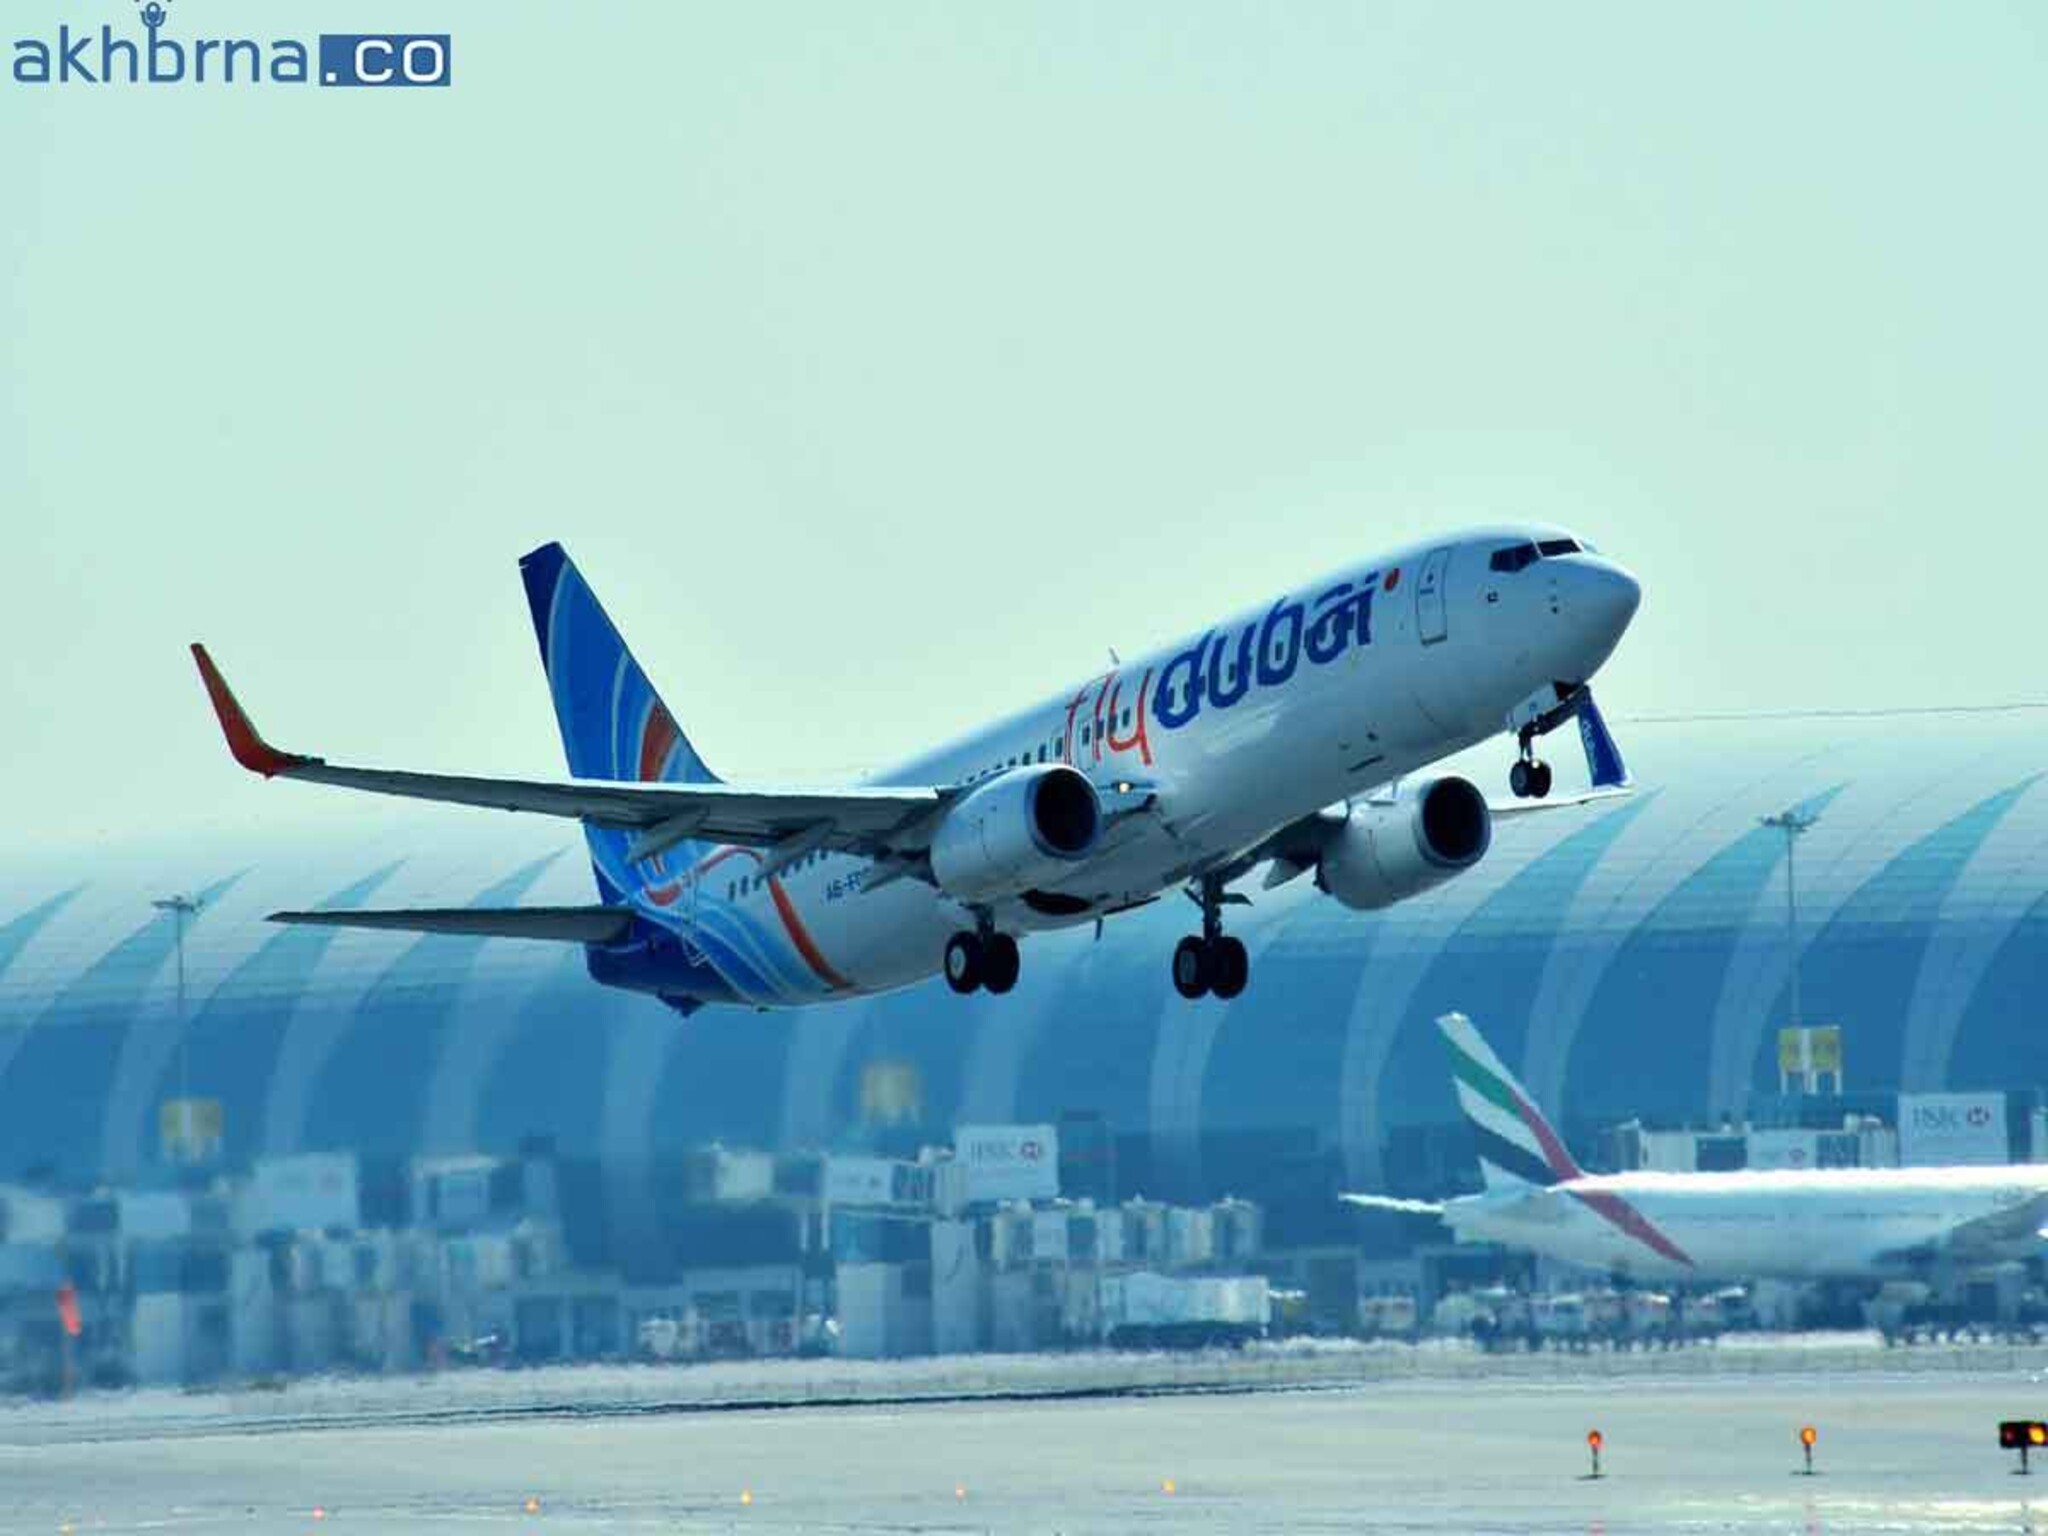 UAE: Flydubai announces a temporary airspace closure in the affected region